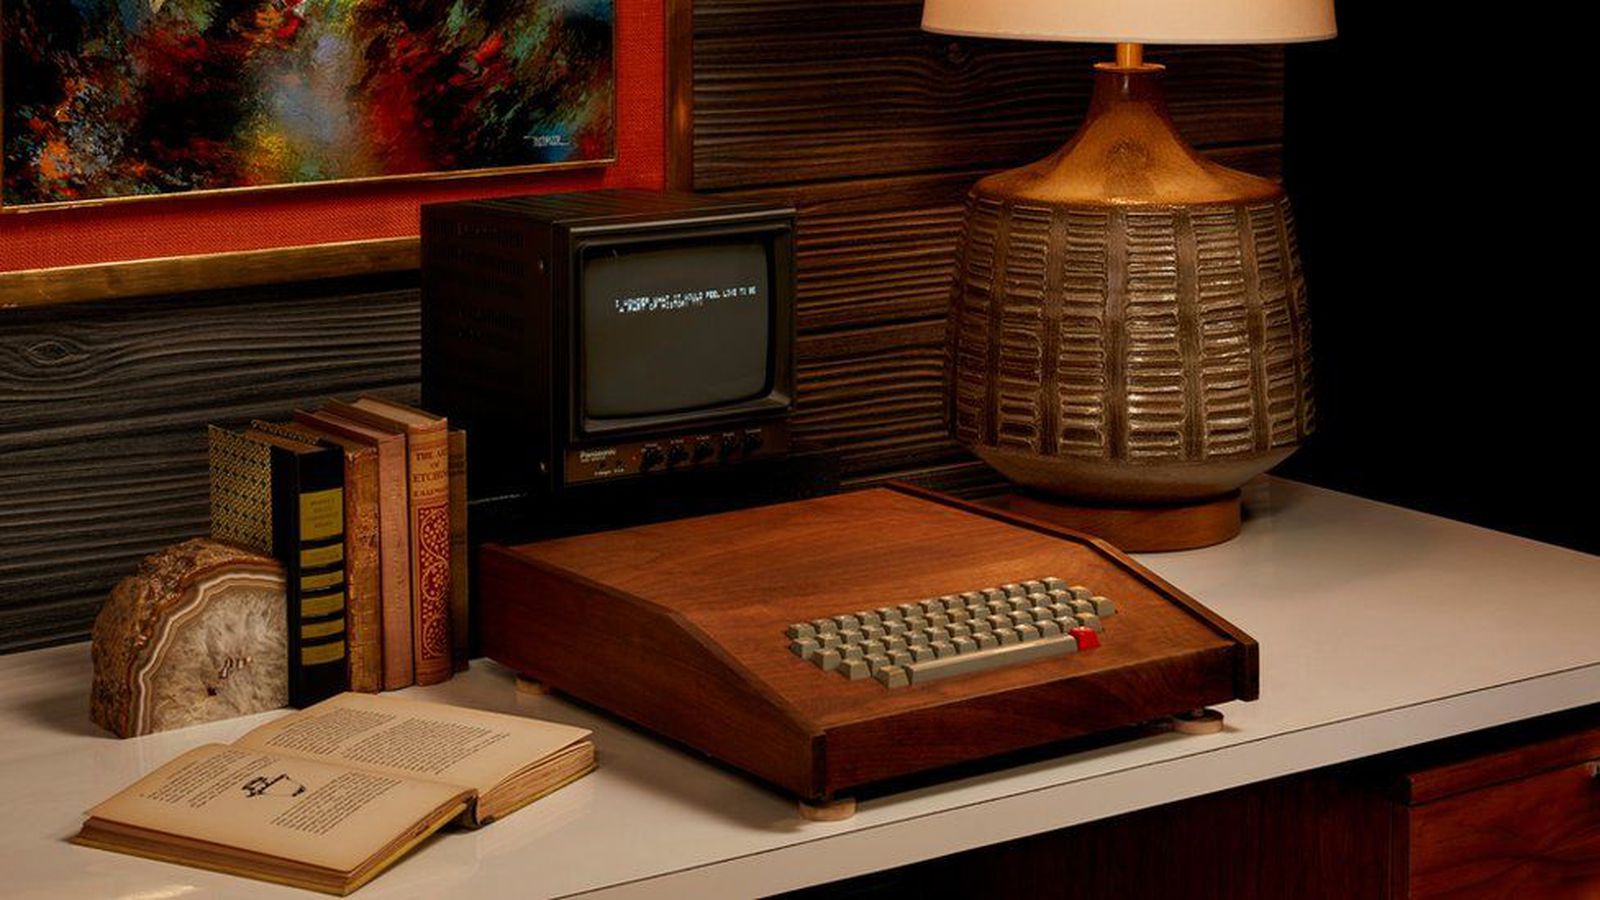 Rare Apple-1 Computer in Koa Wood Case Fetches $500,000 at Auction